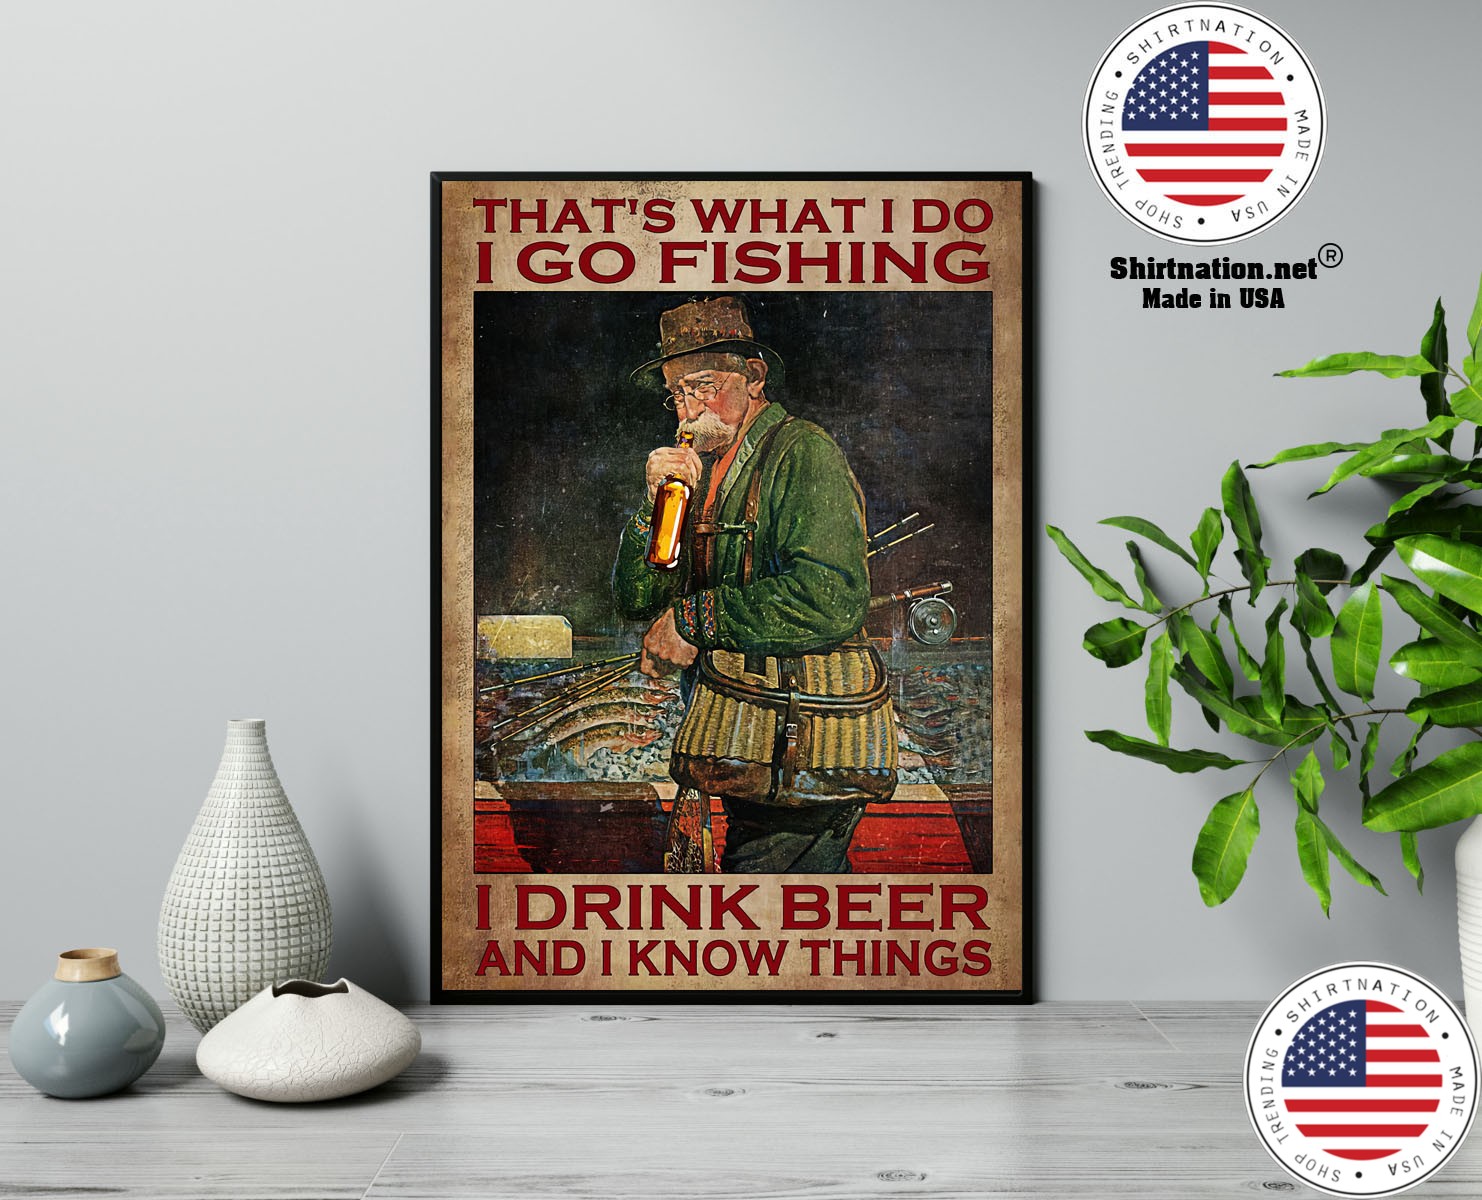 Old man Thats what I do I go fishing I drink beer and I know things poster 13